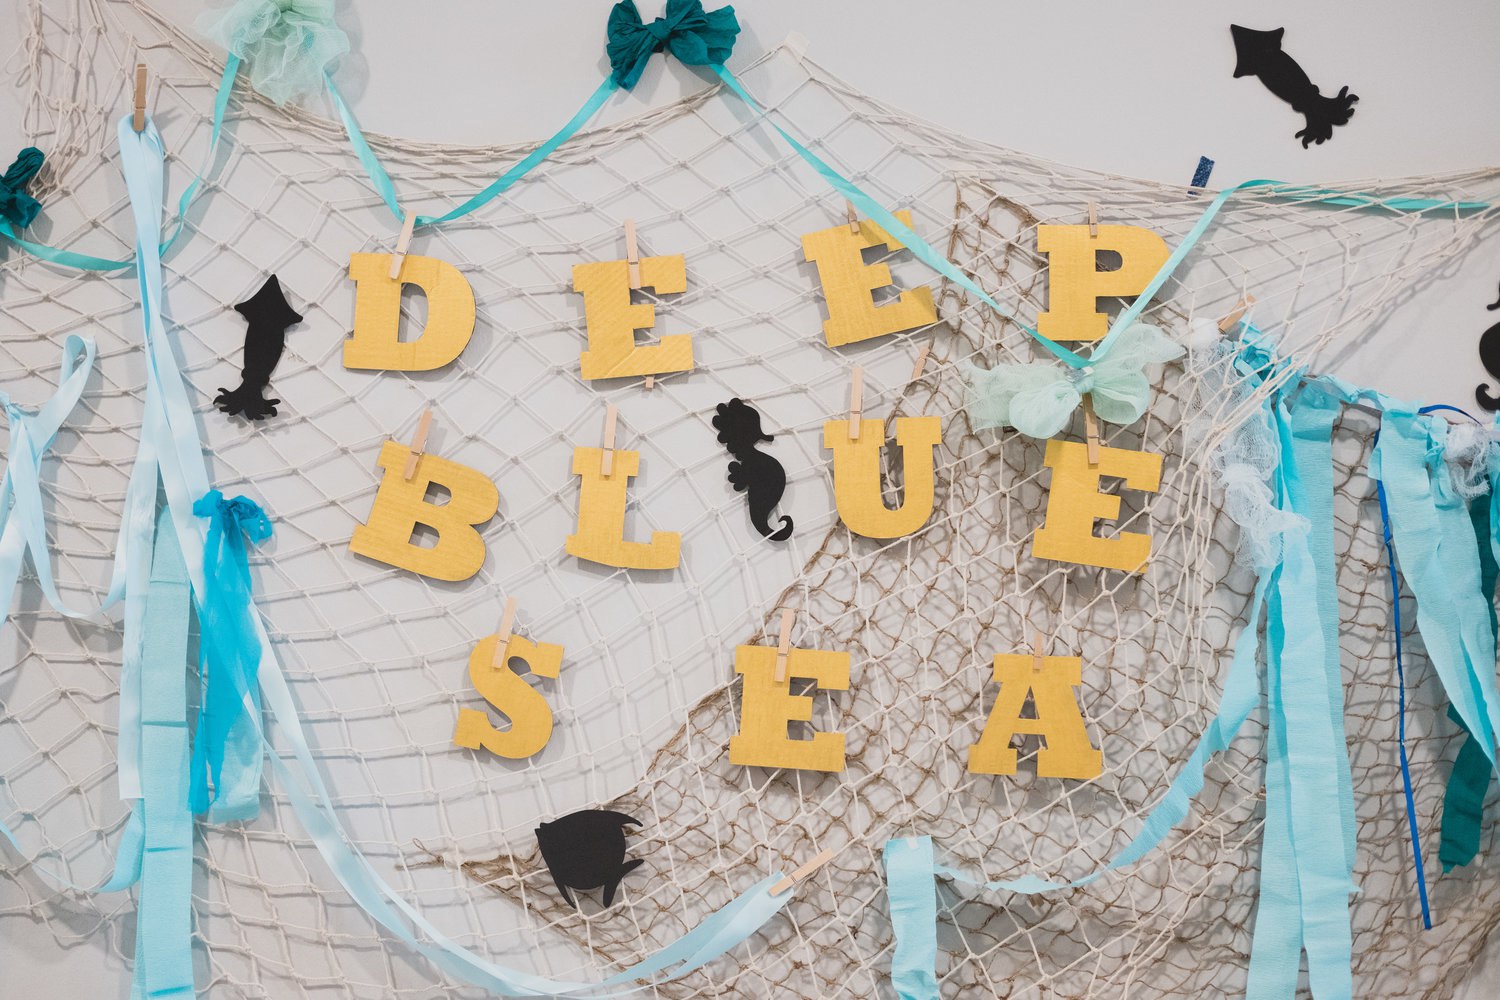 Backdrop and artwork from Deep Blue Sea, a classical concert for children with sensory difficulties. (Credit: YSTCM)

